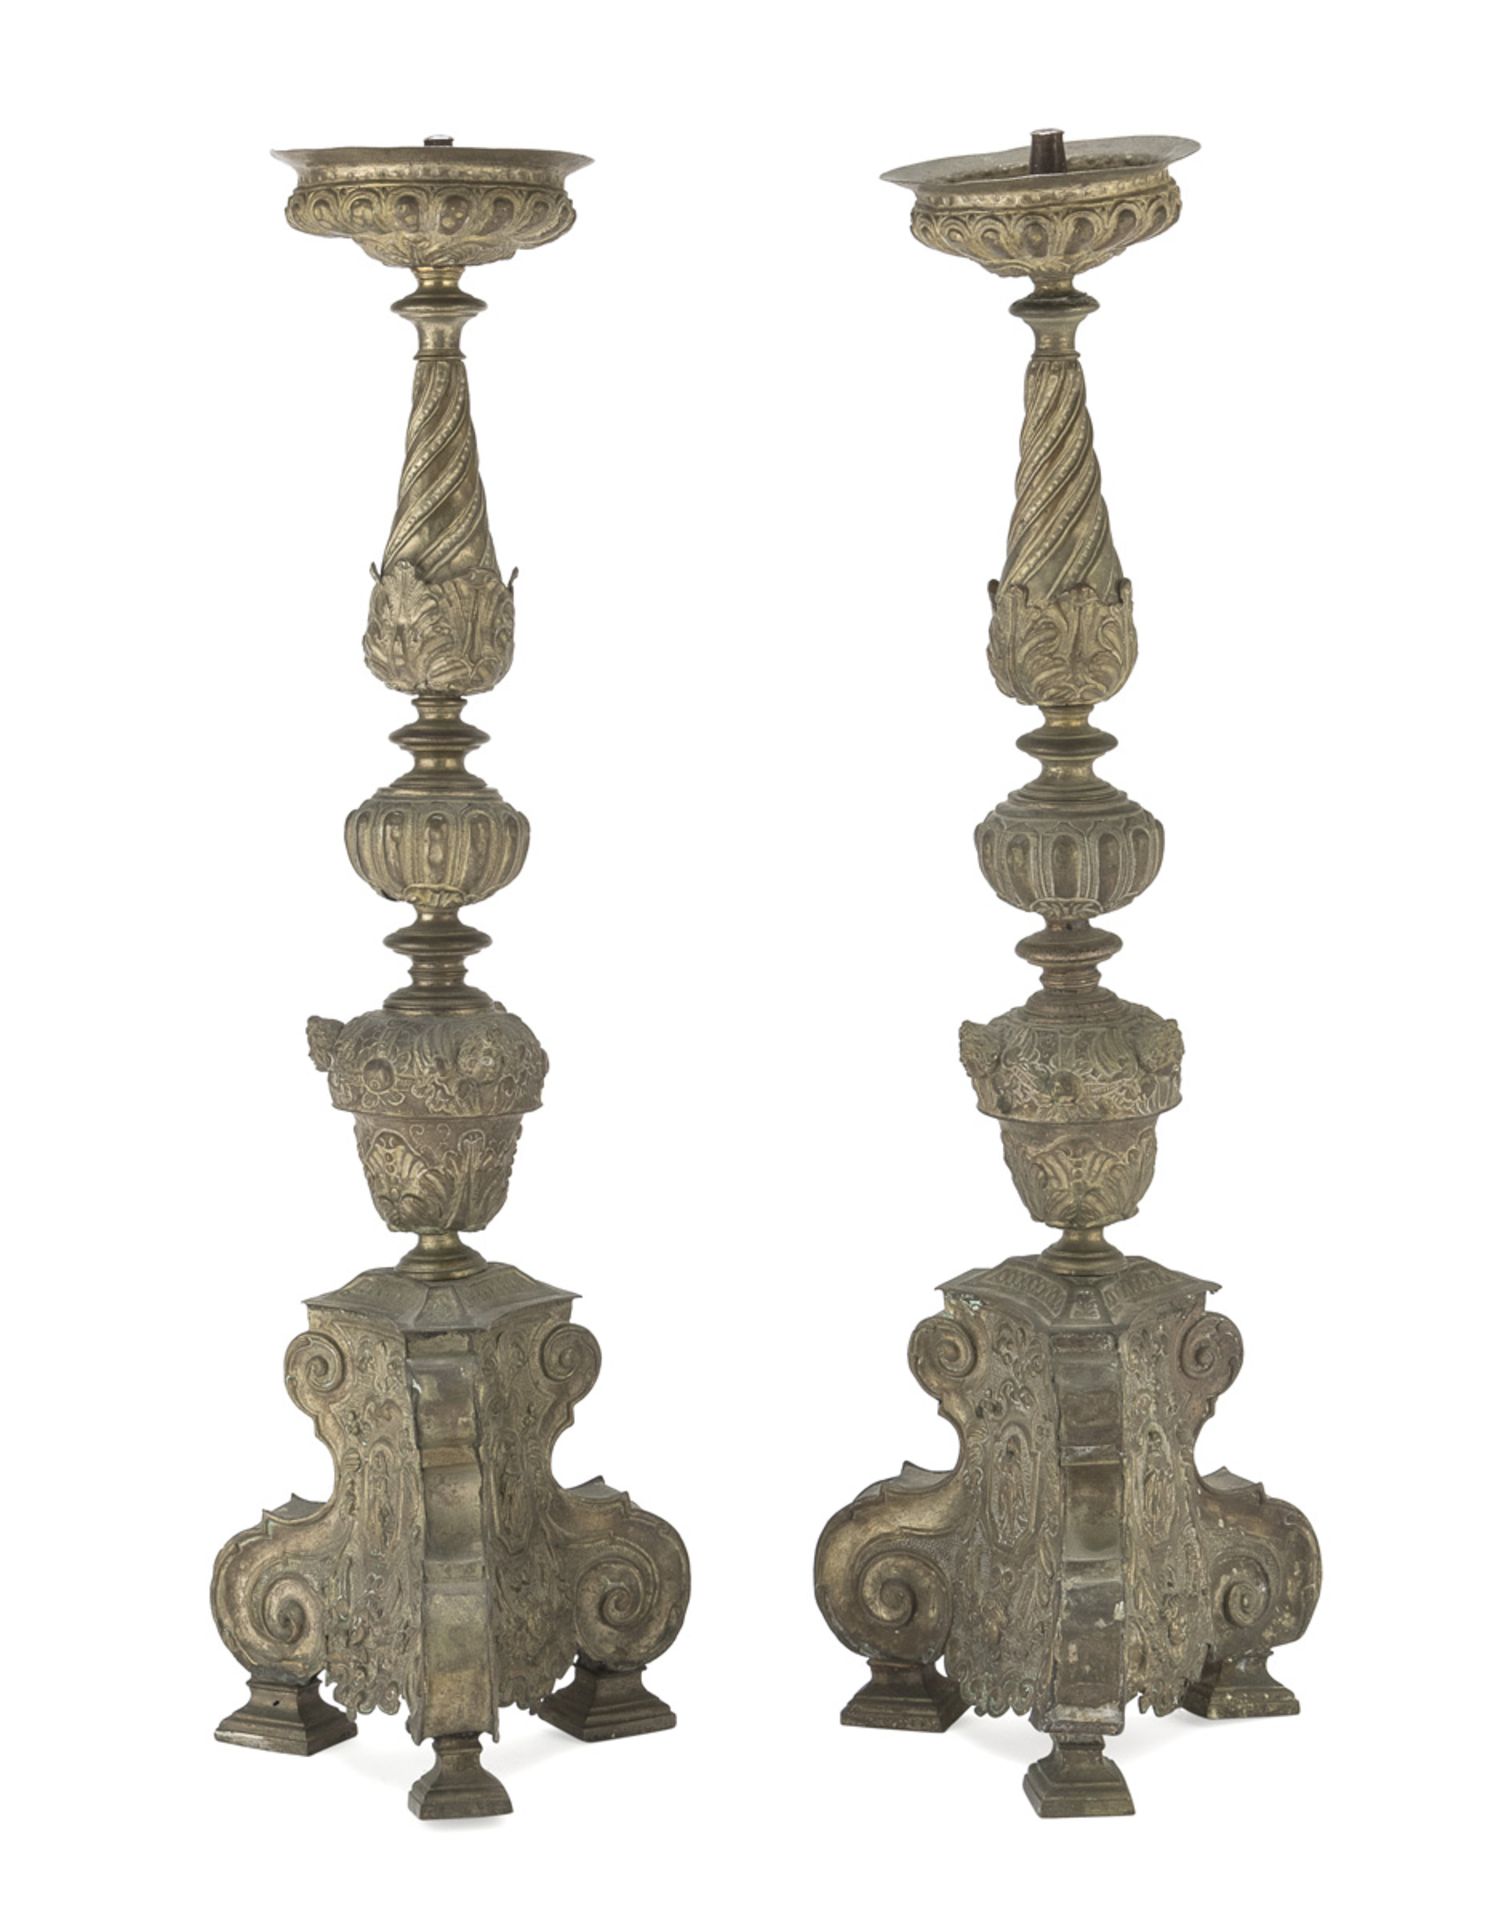 A PAIR OF SILVER-PLATED CANDELABRA 18TH CENTURY